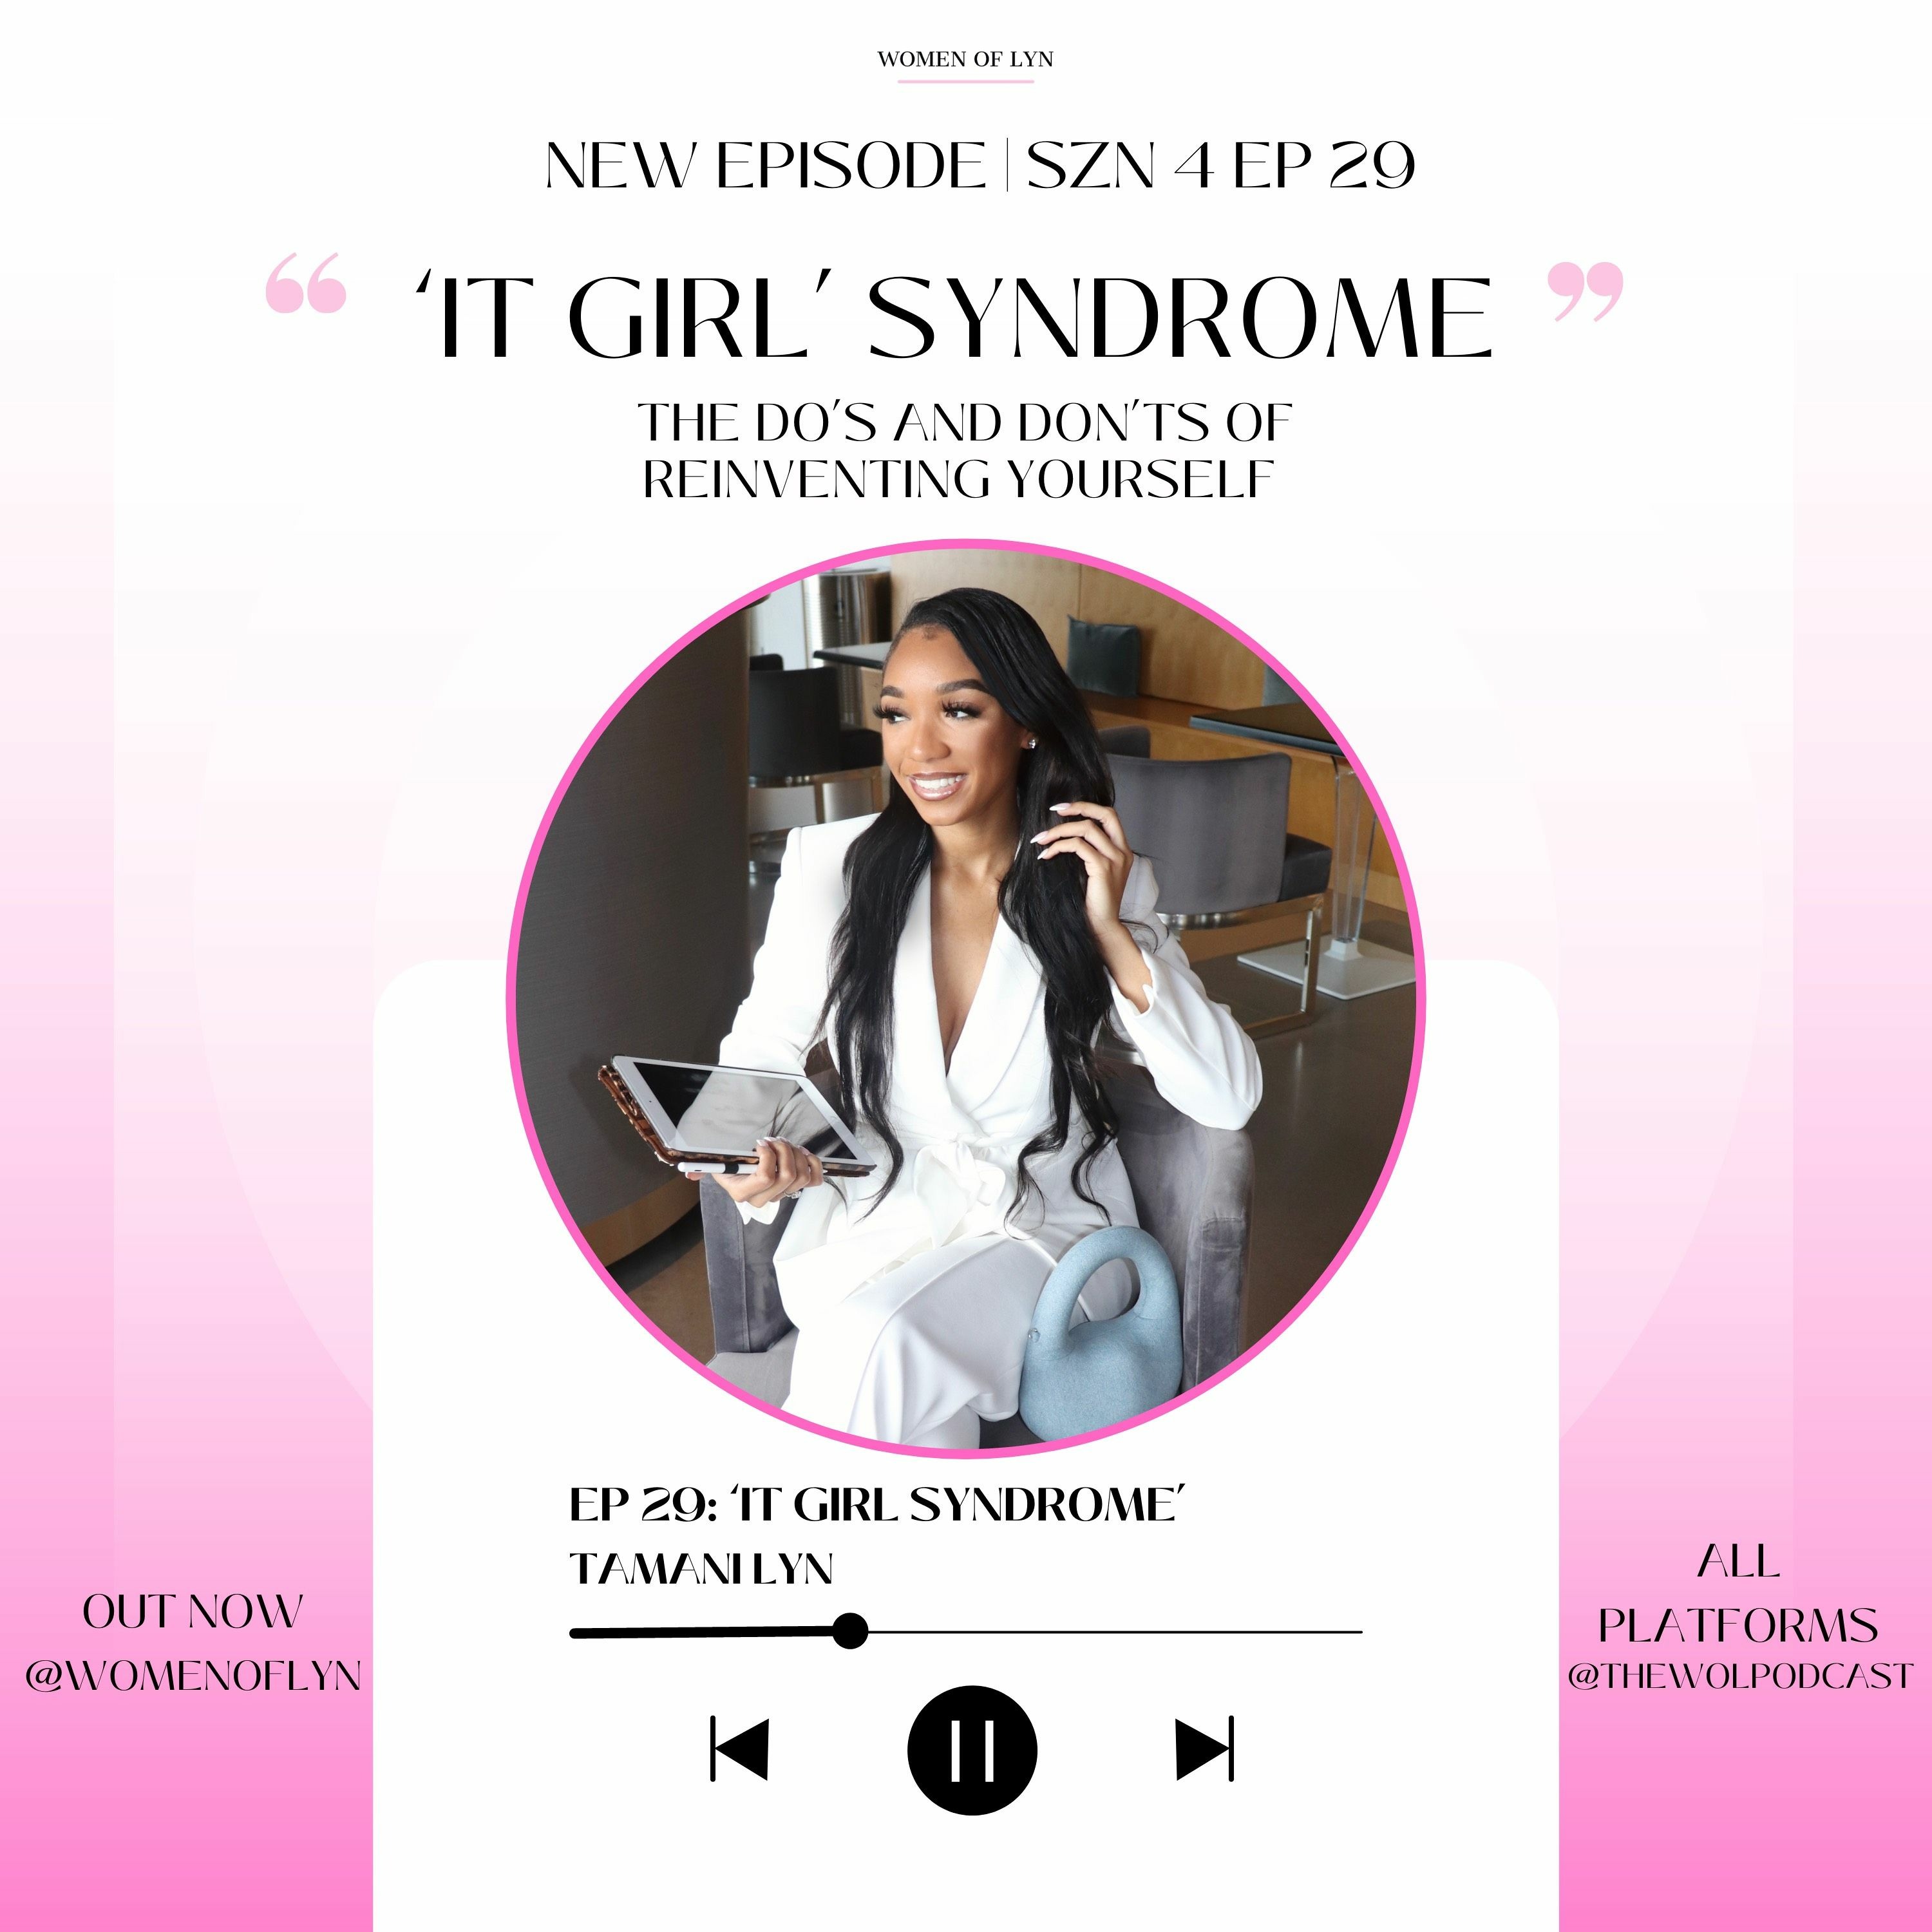 Episode 29: ”IT Girl Syndrome; The Do’s and Don’ts of Reinventing Yourself”